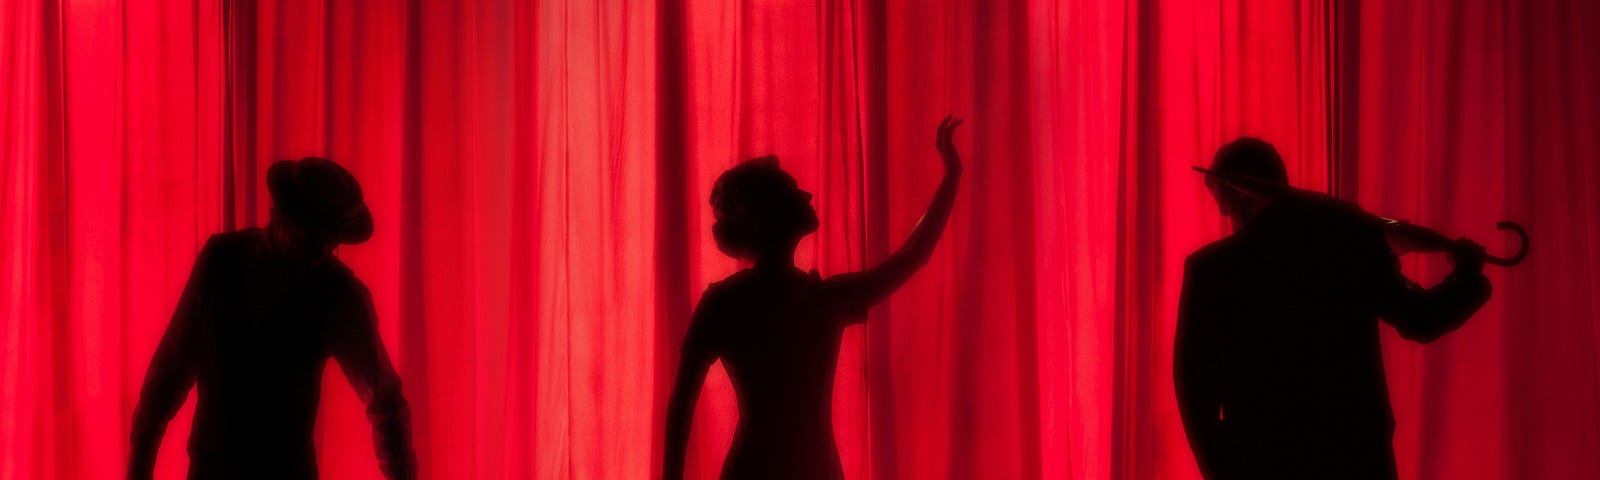 Silhouettes of three actors behind a red, theater curtain. A man in a hat, a woman with an arm lifted, and another man with an umbrella.